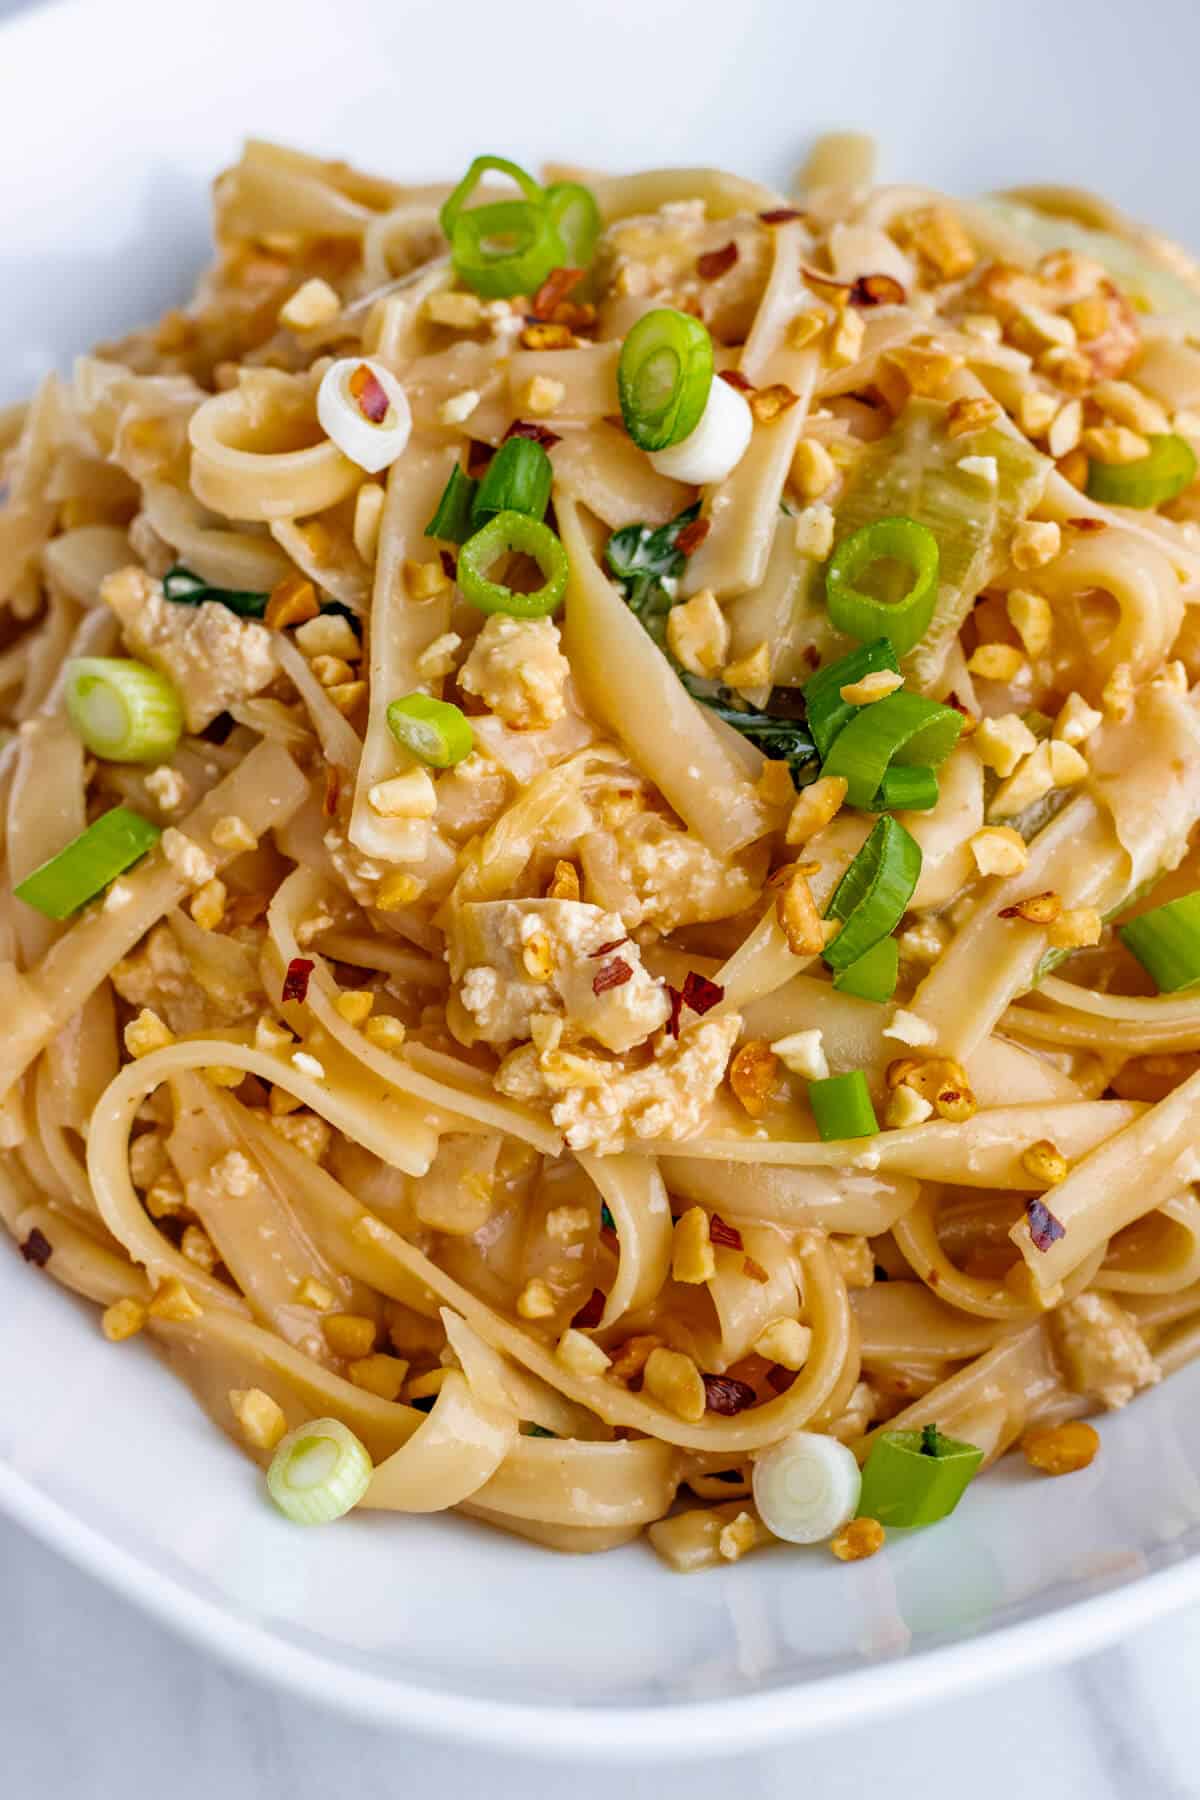 Peanut noodles in a bowl topped with green onions and crushed peanuts